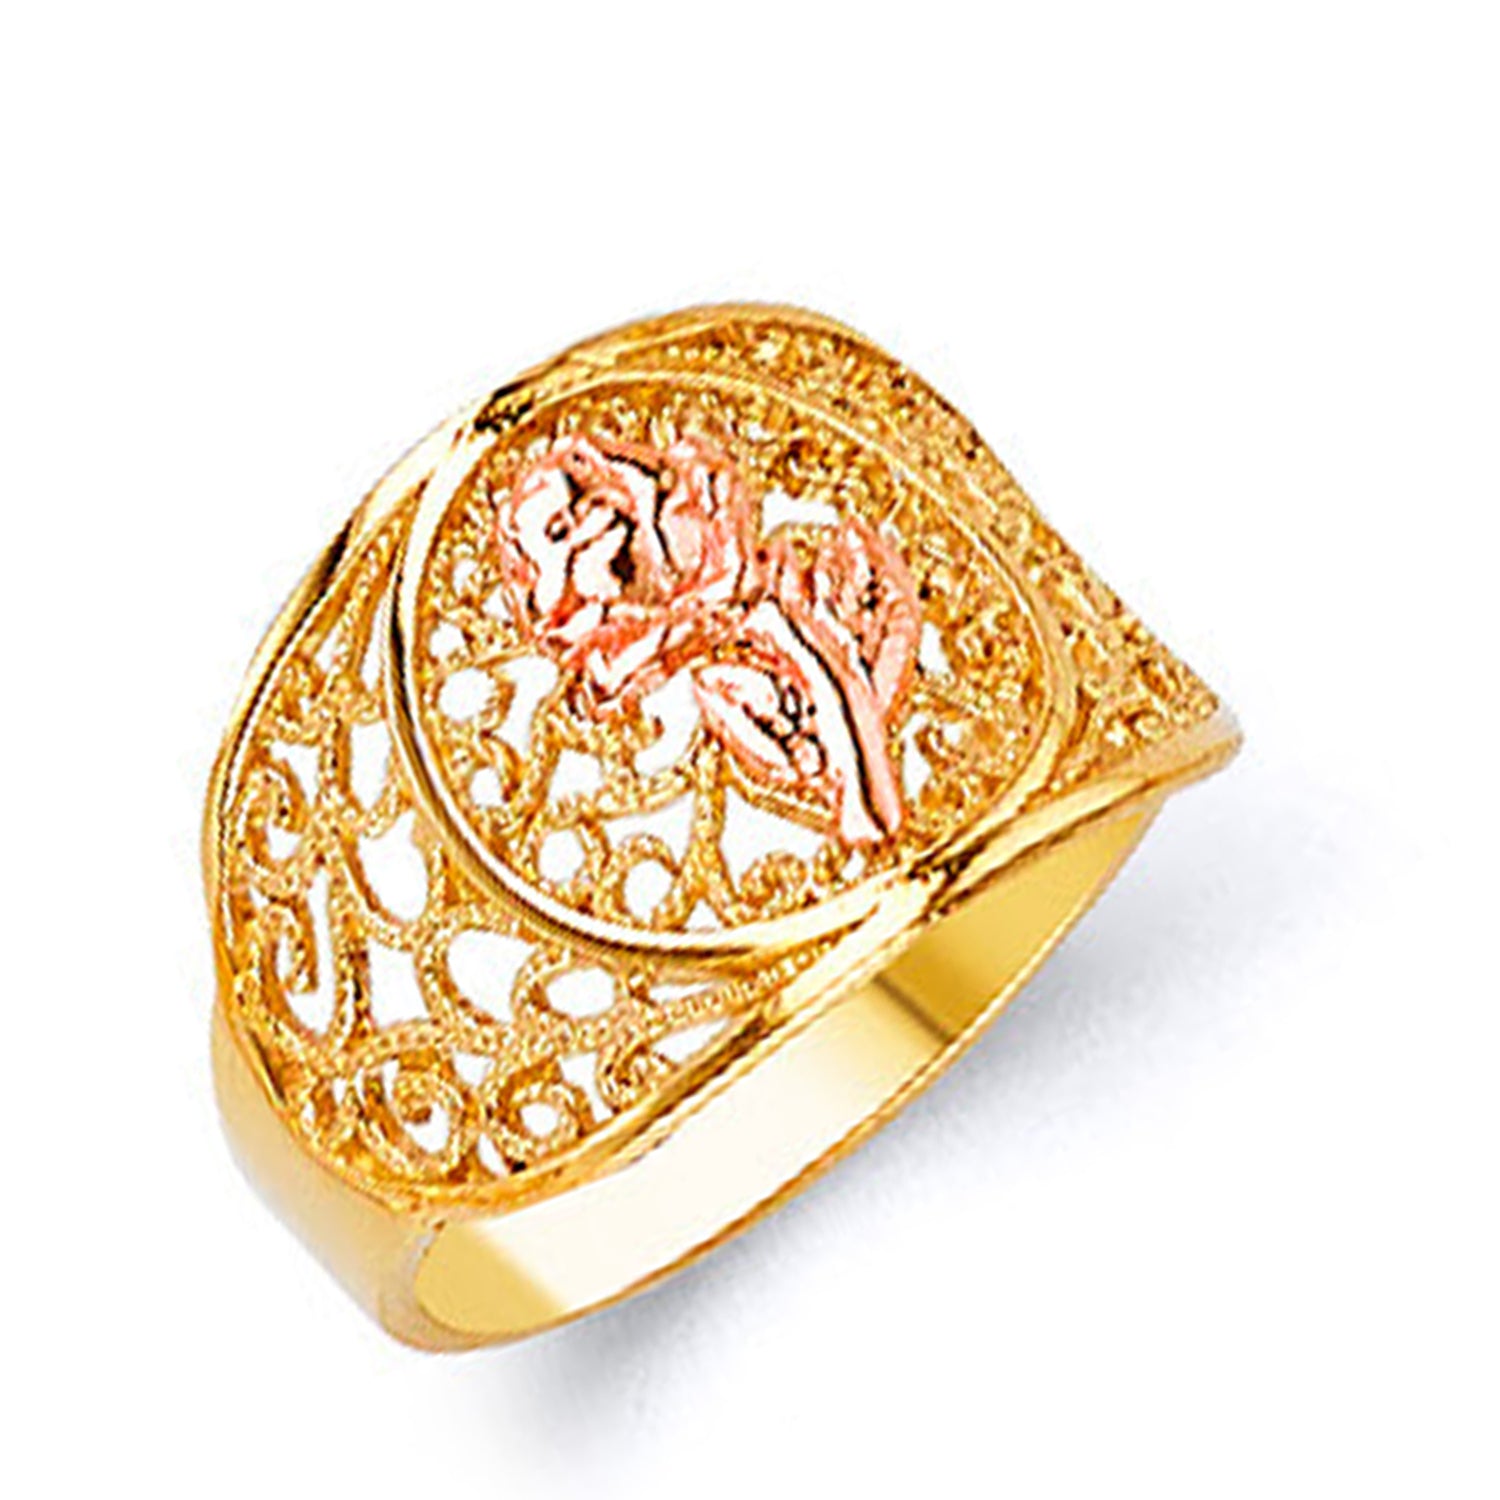 Lattice Embroidery Rose Ring in Solid Gold 